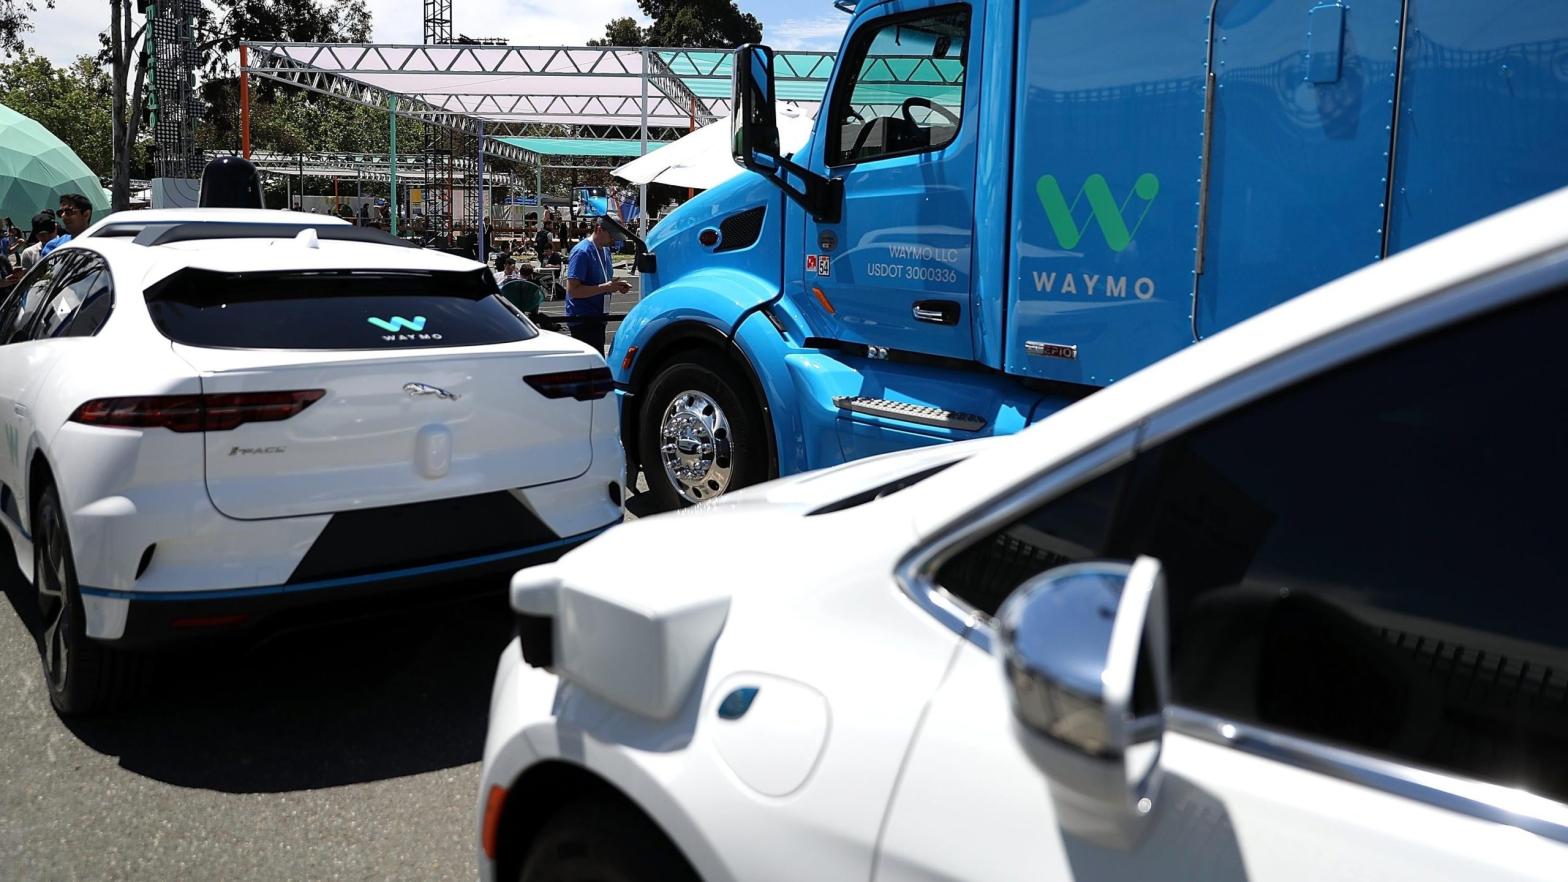 A fleet of Waymo cars shown off at Google I/O in 2018. (Photo: Justin Sullivan, Getty Images)